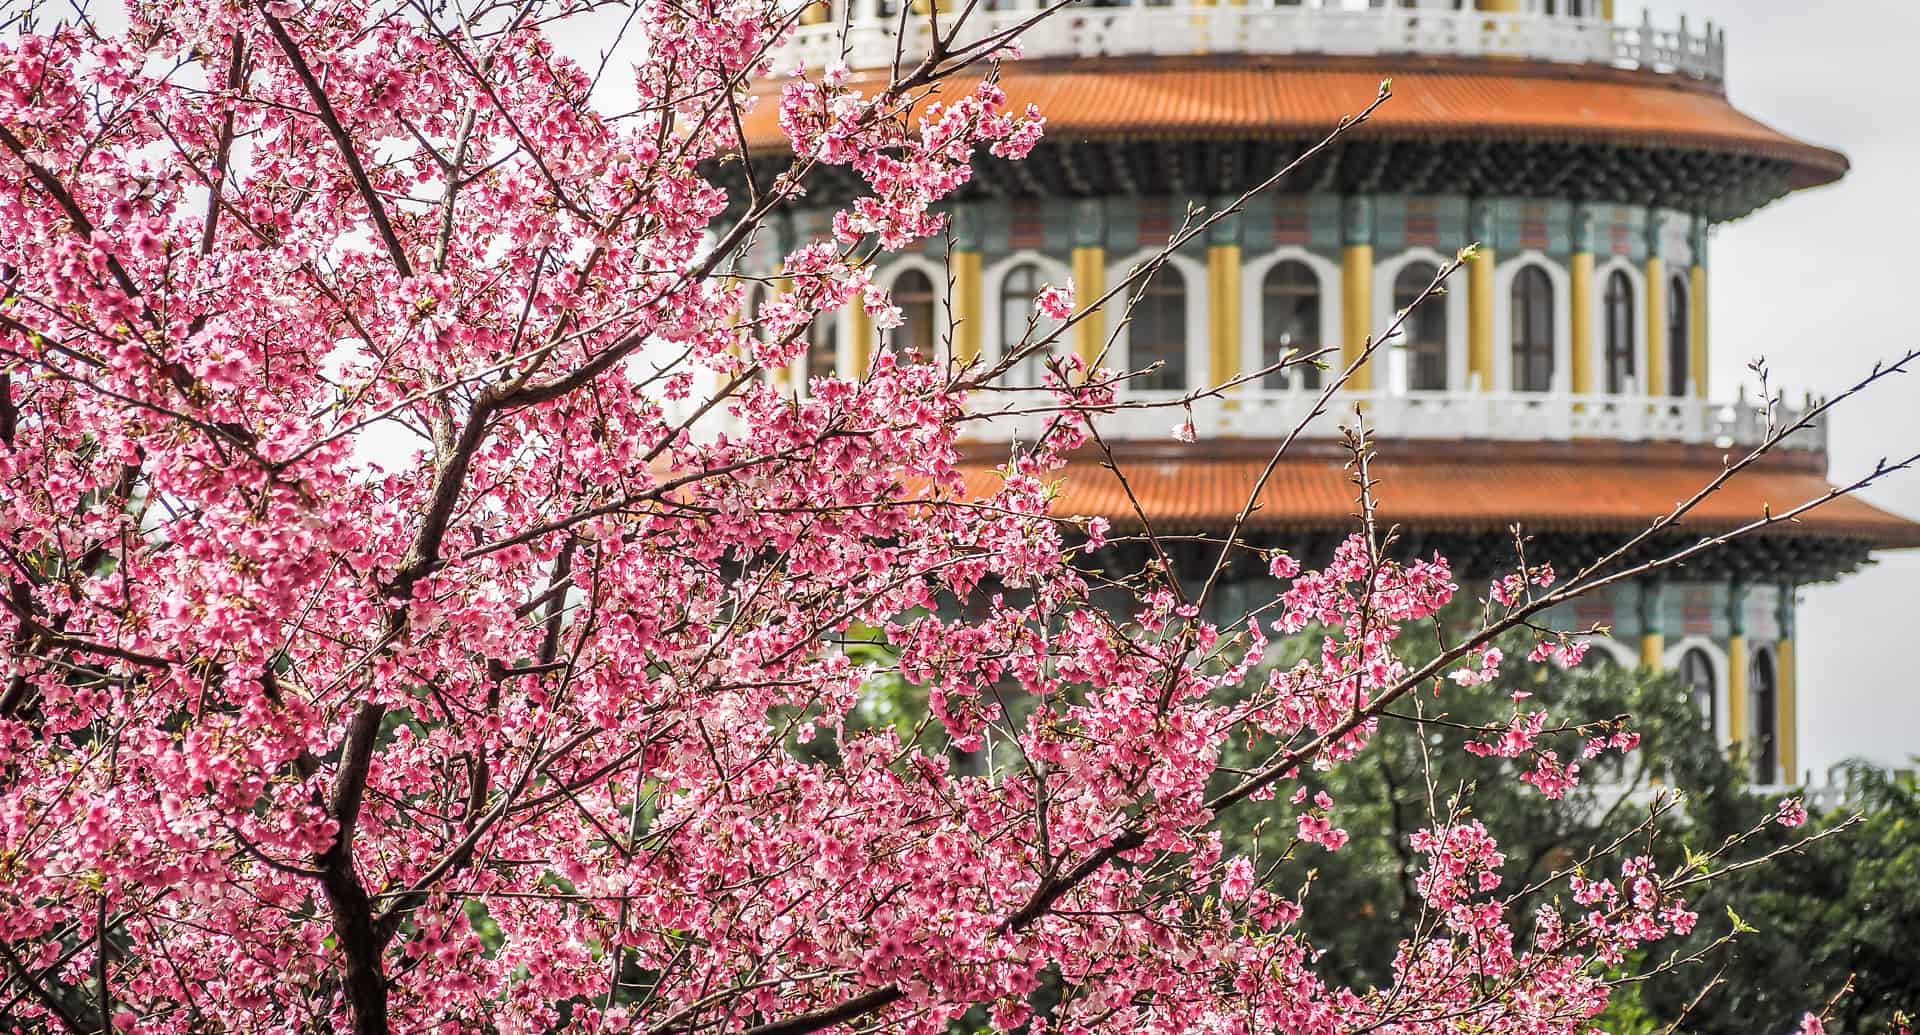 A guide to visiting Taipei in March and Taiwan in March